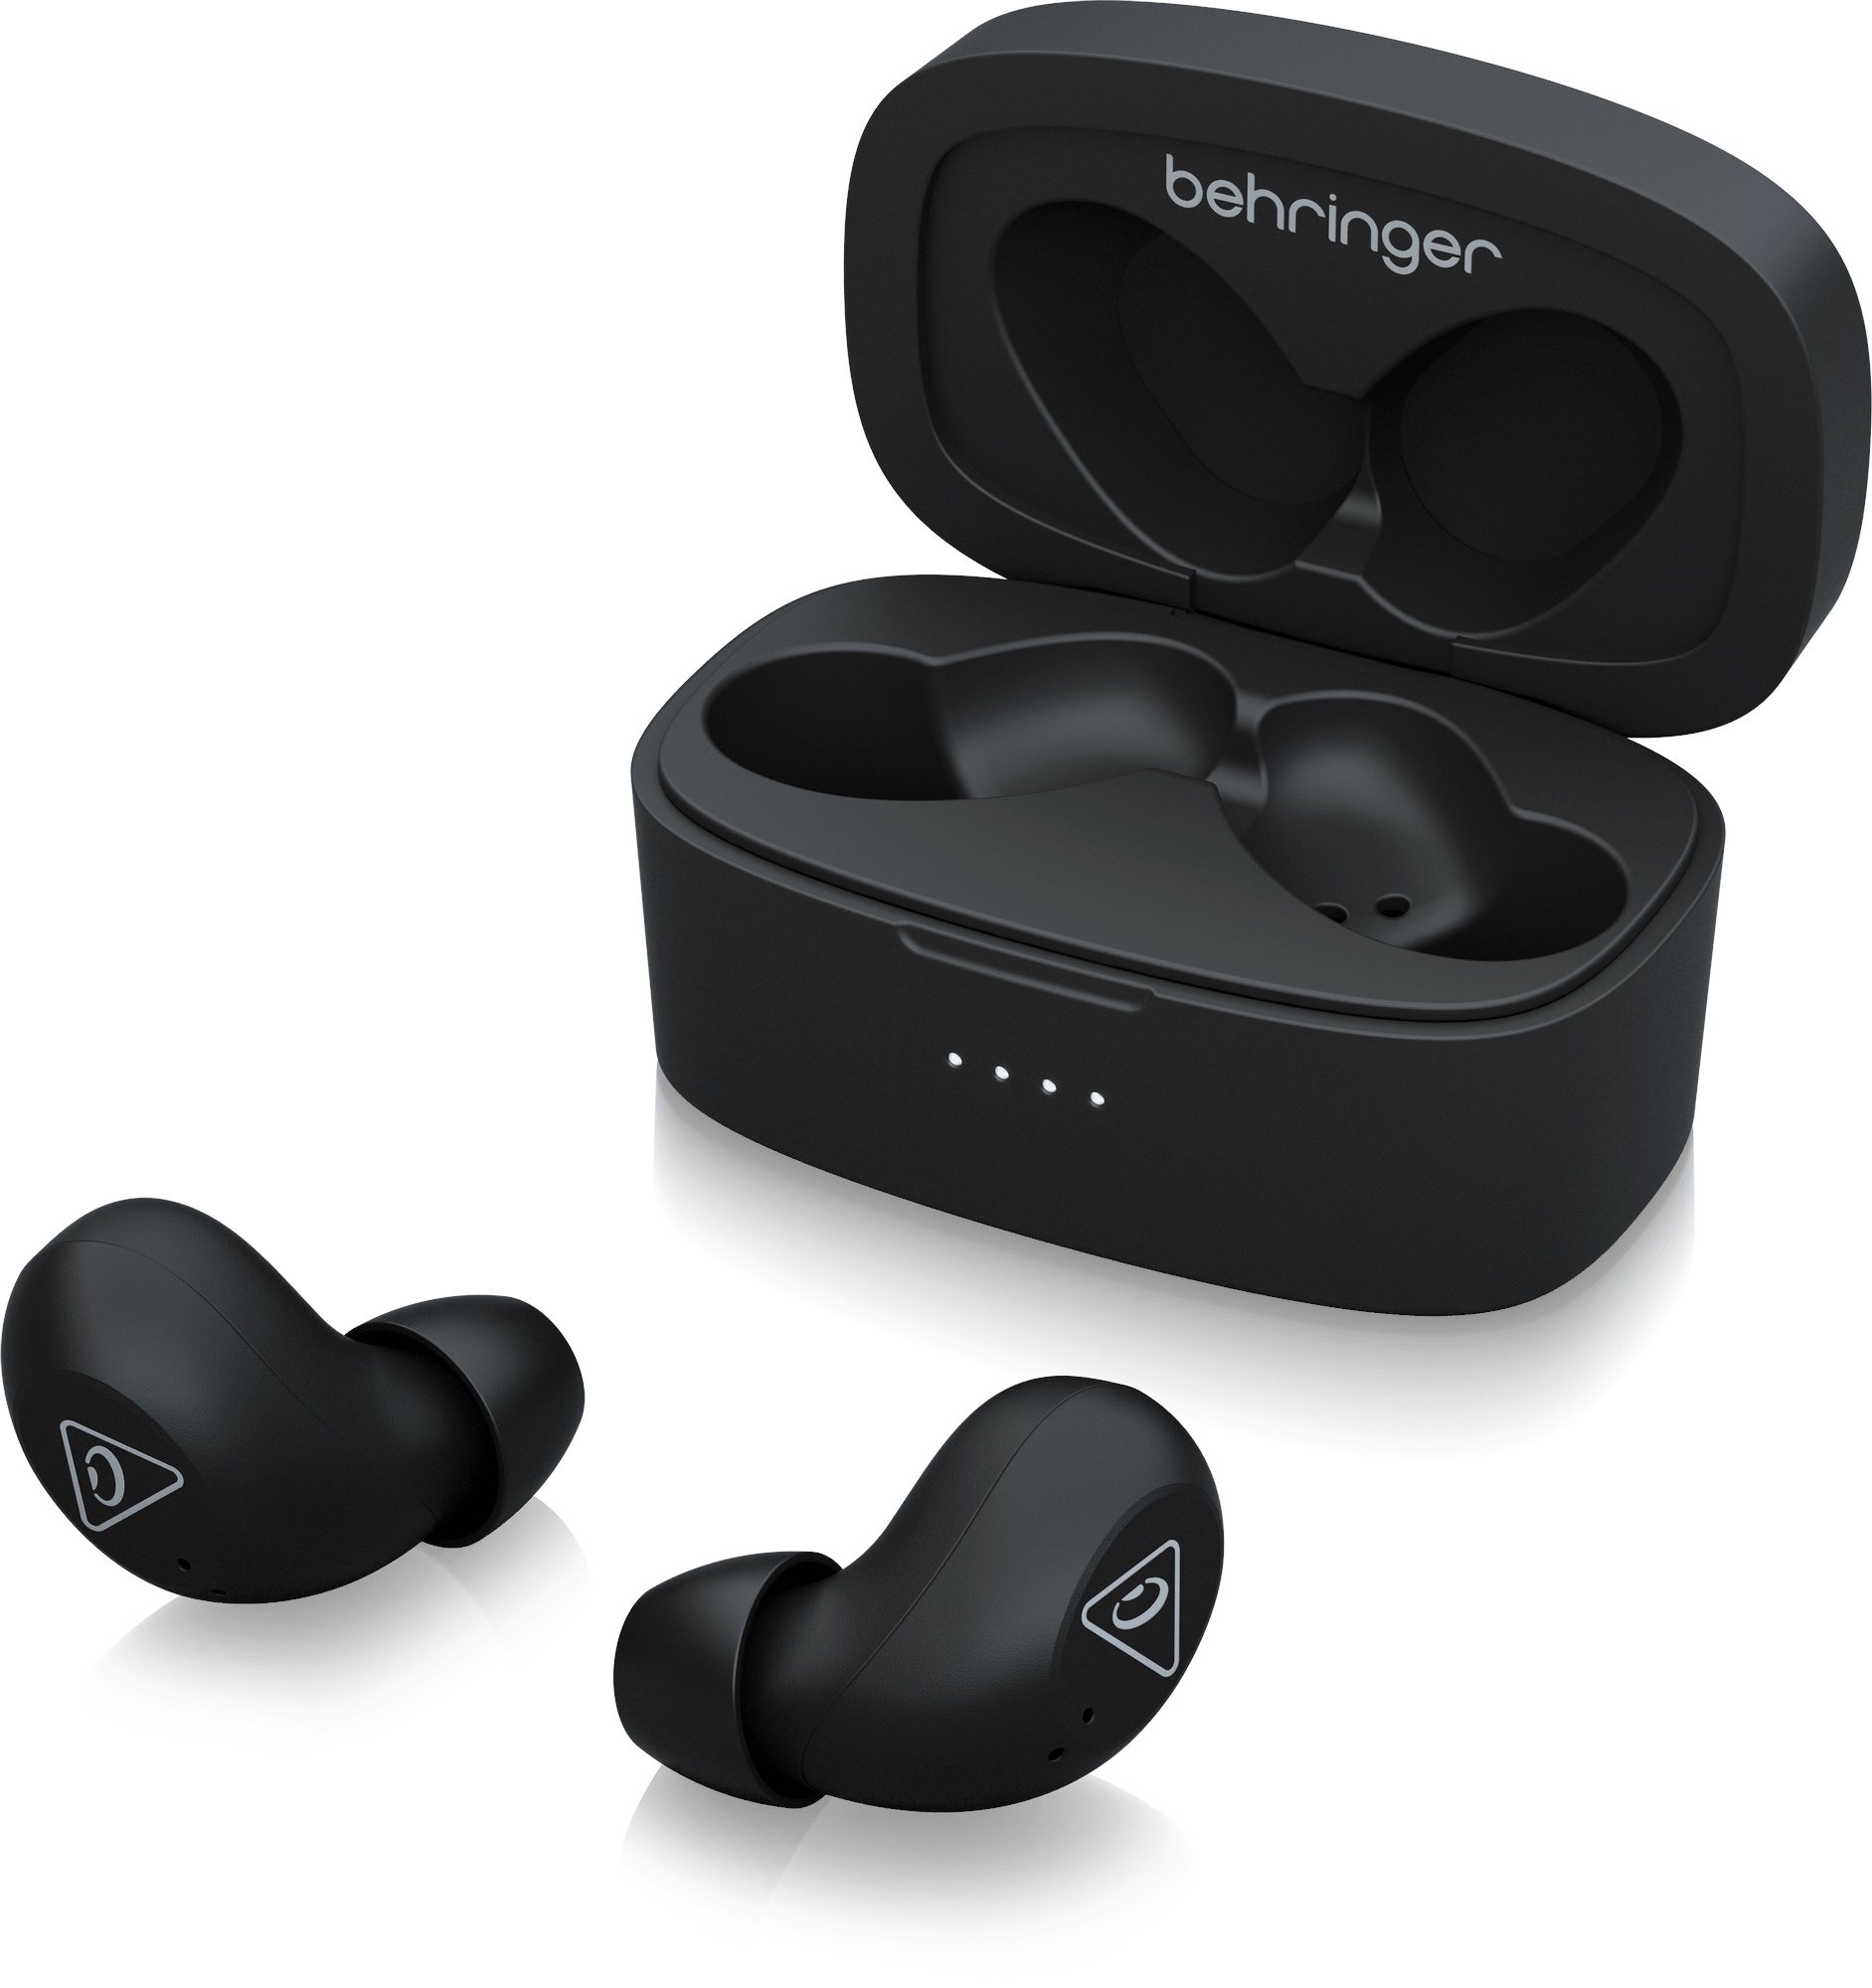 Behringer Live Buds Wireless Earphones with Bluetooth Connectivity